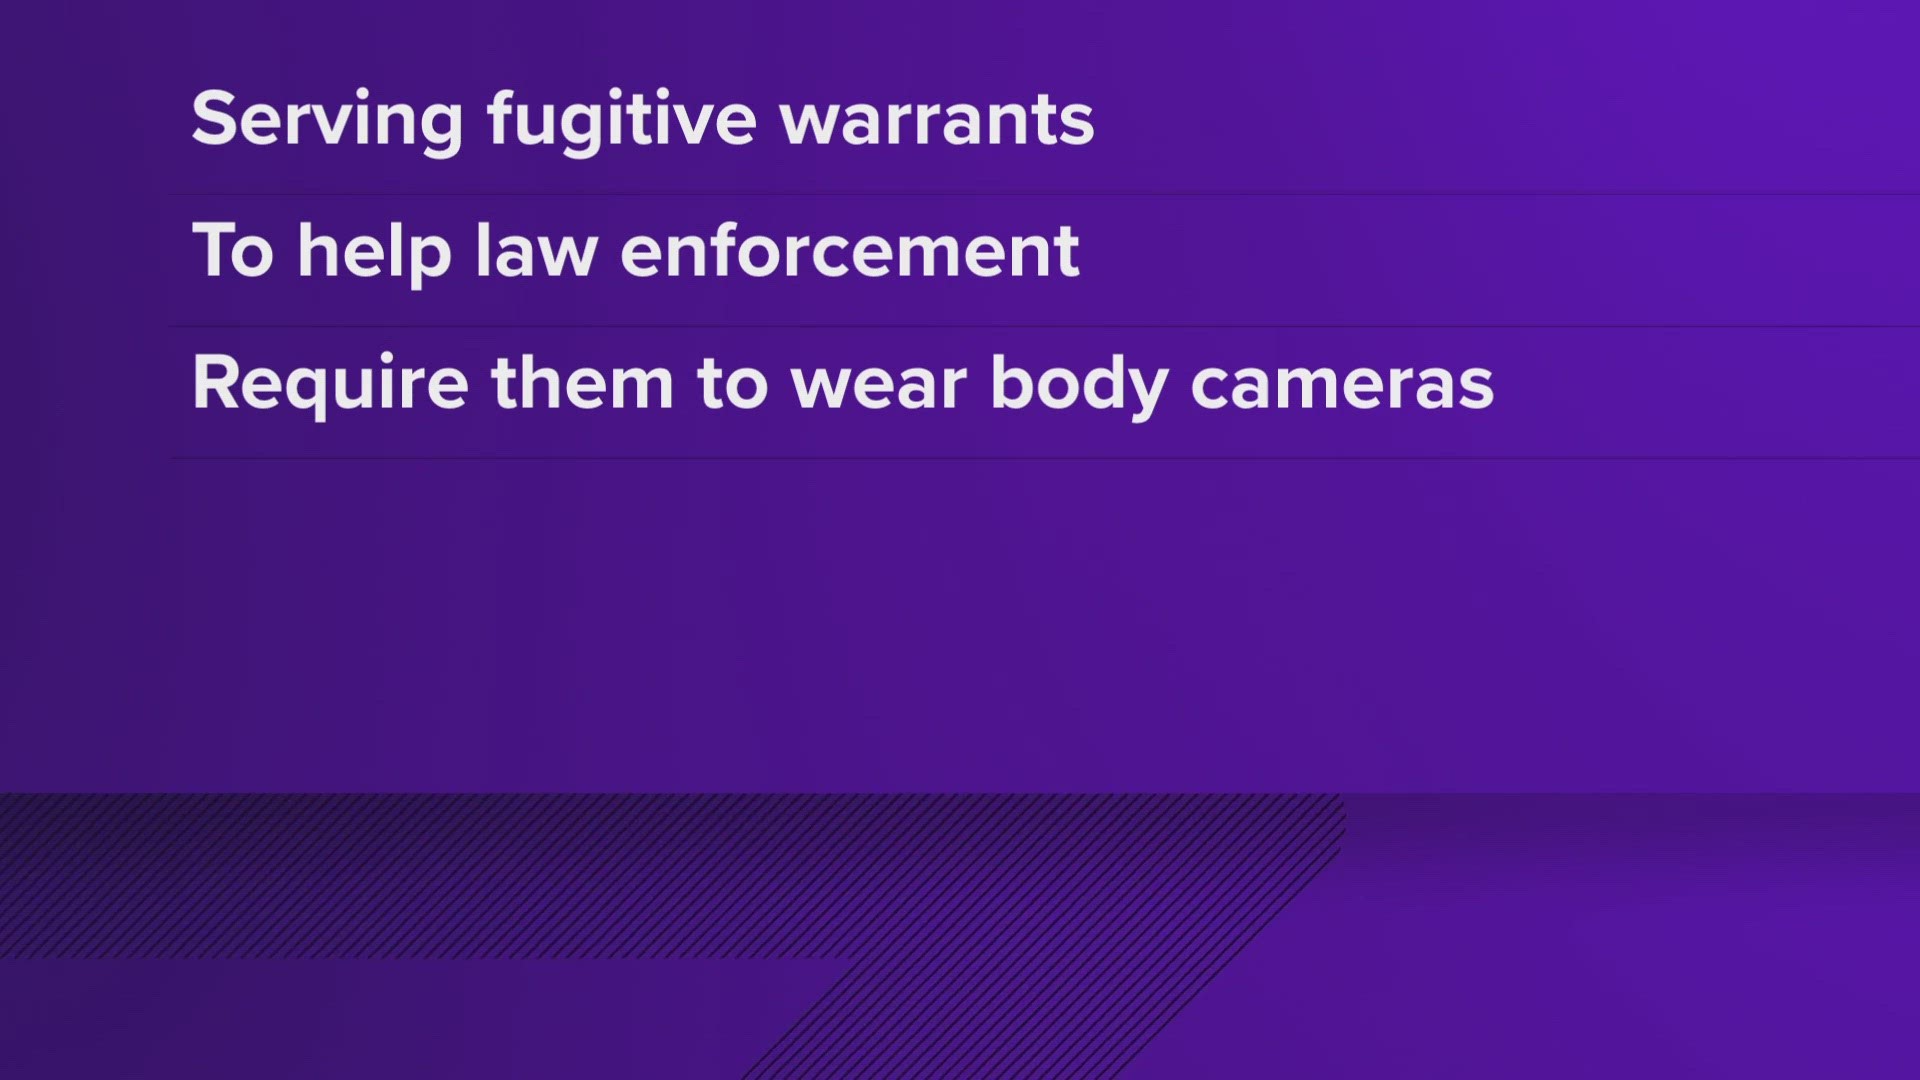 Marshals with the Fugitive Task Force previously weren't required to wear body-worn cameras, but that's changing in August.